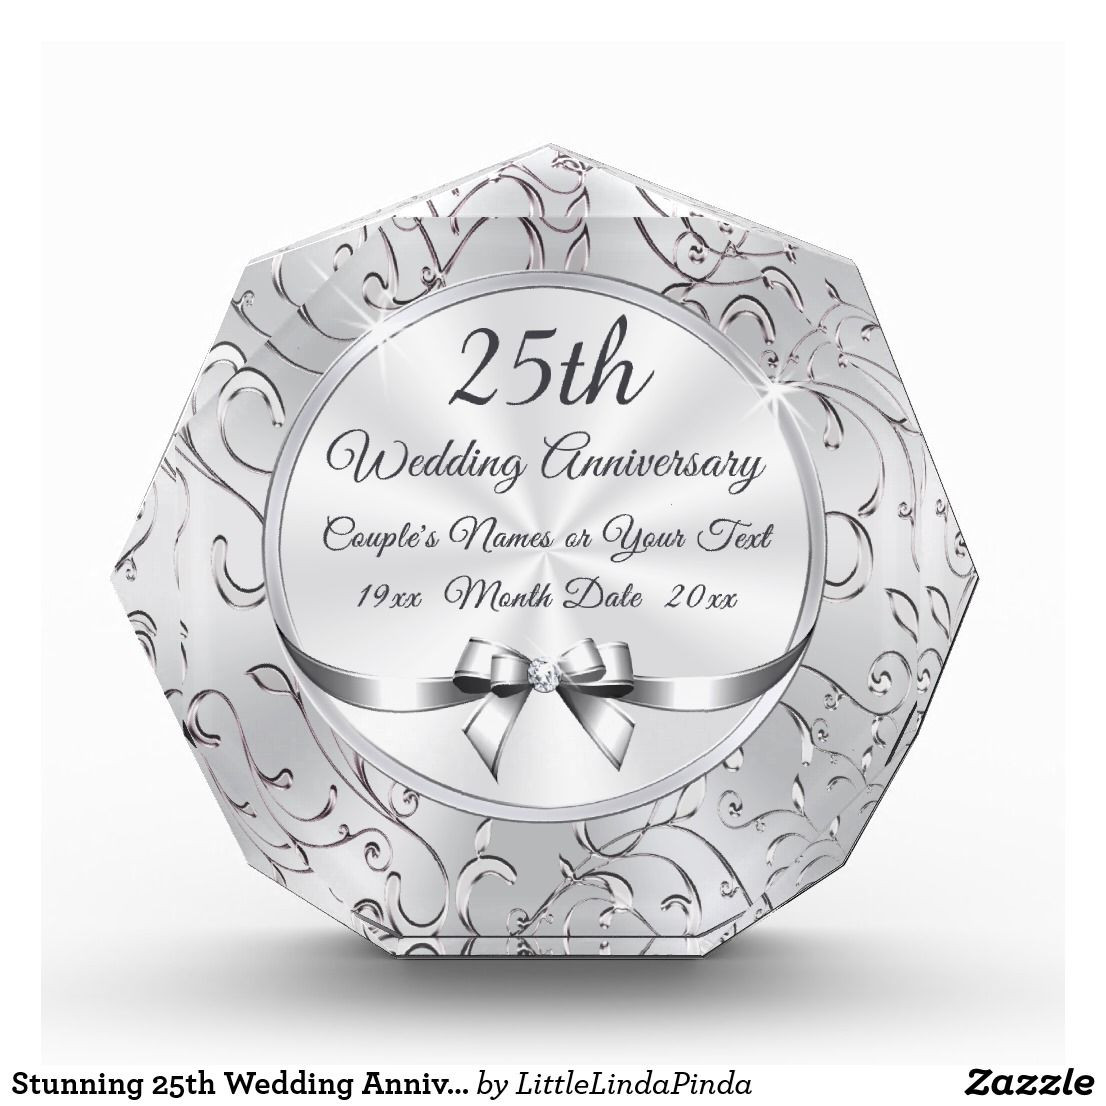 Wedding Anniversary Gift Ideas For Couple
 25th Wedding Anniversary Gift Ideas For Couples